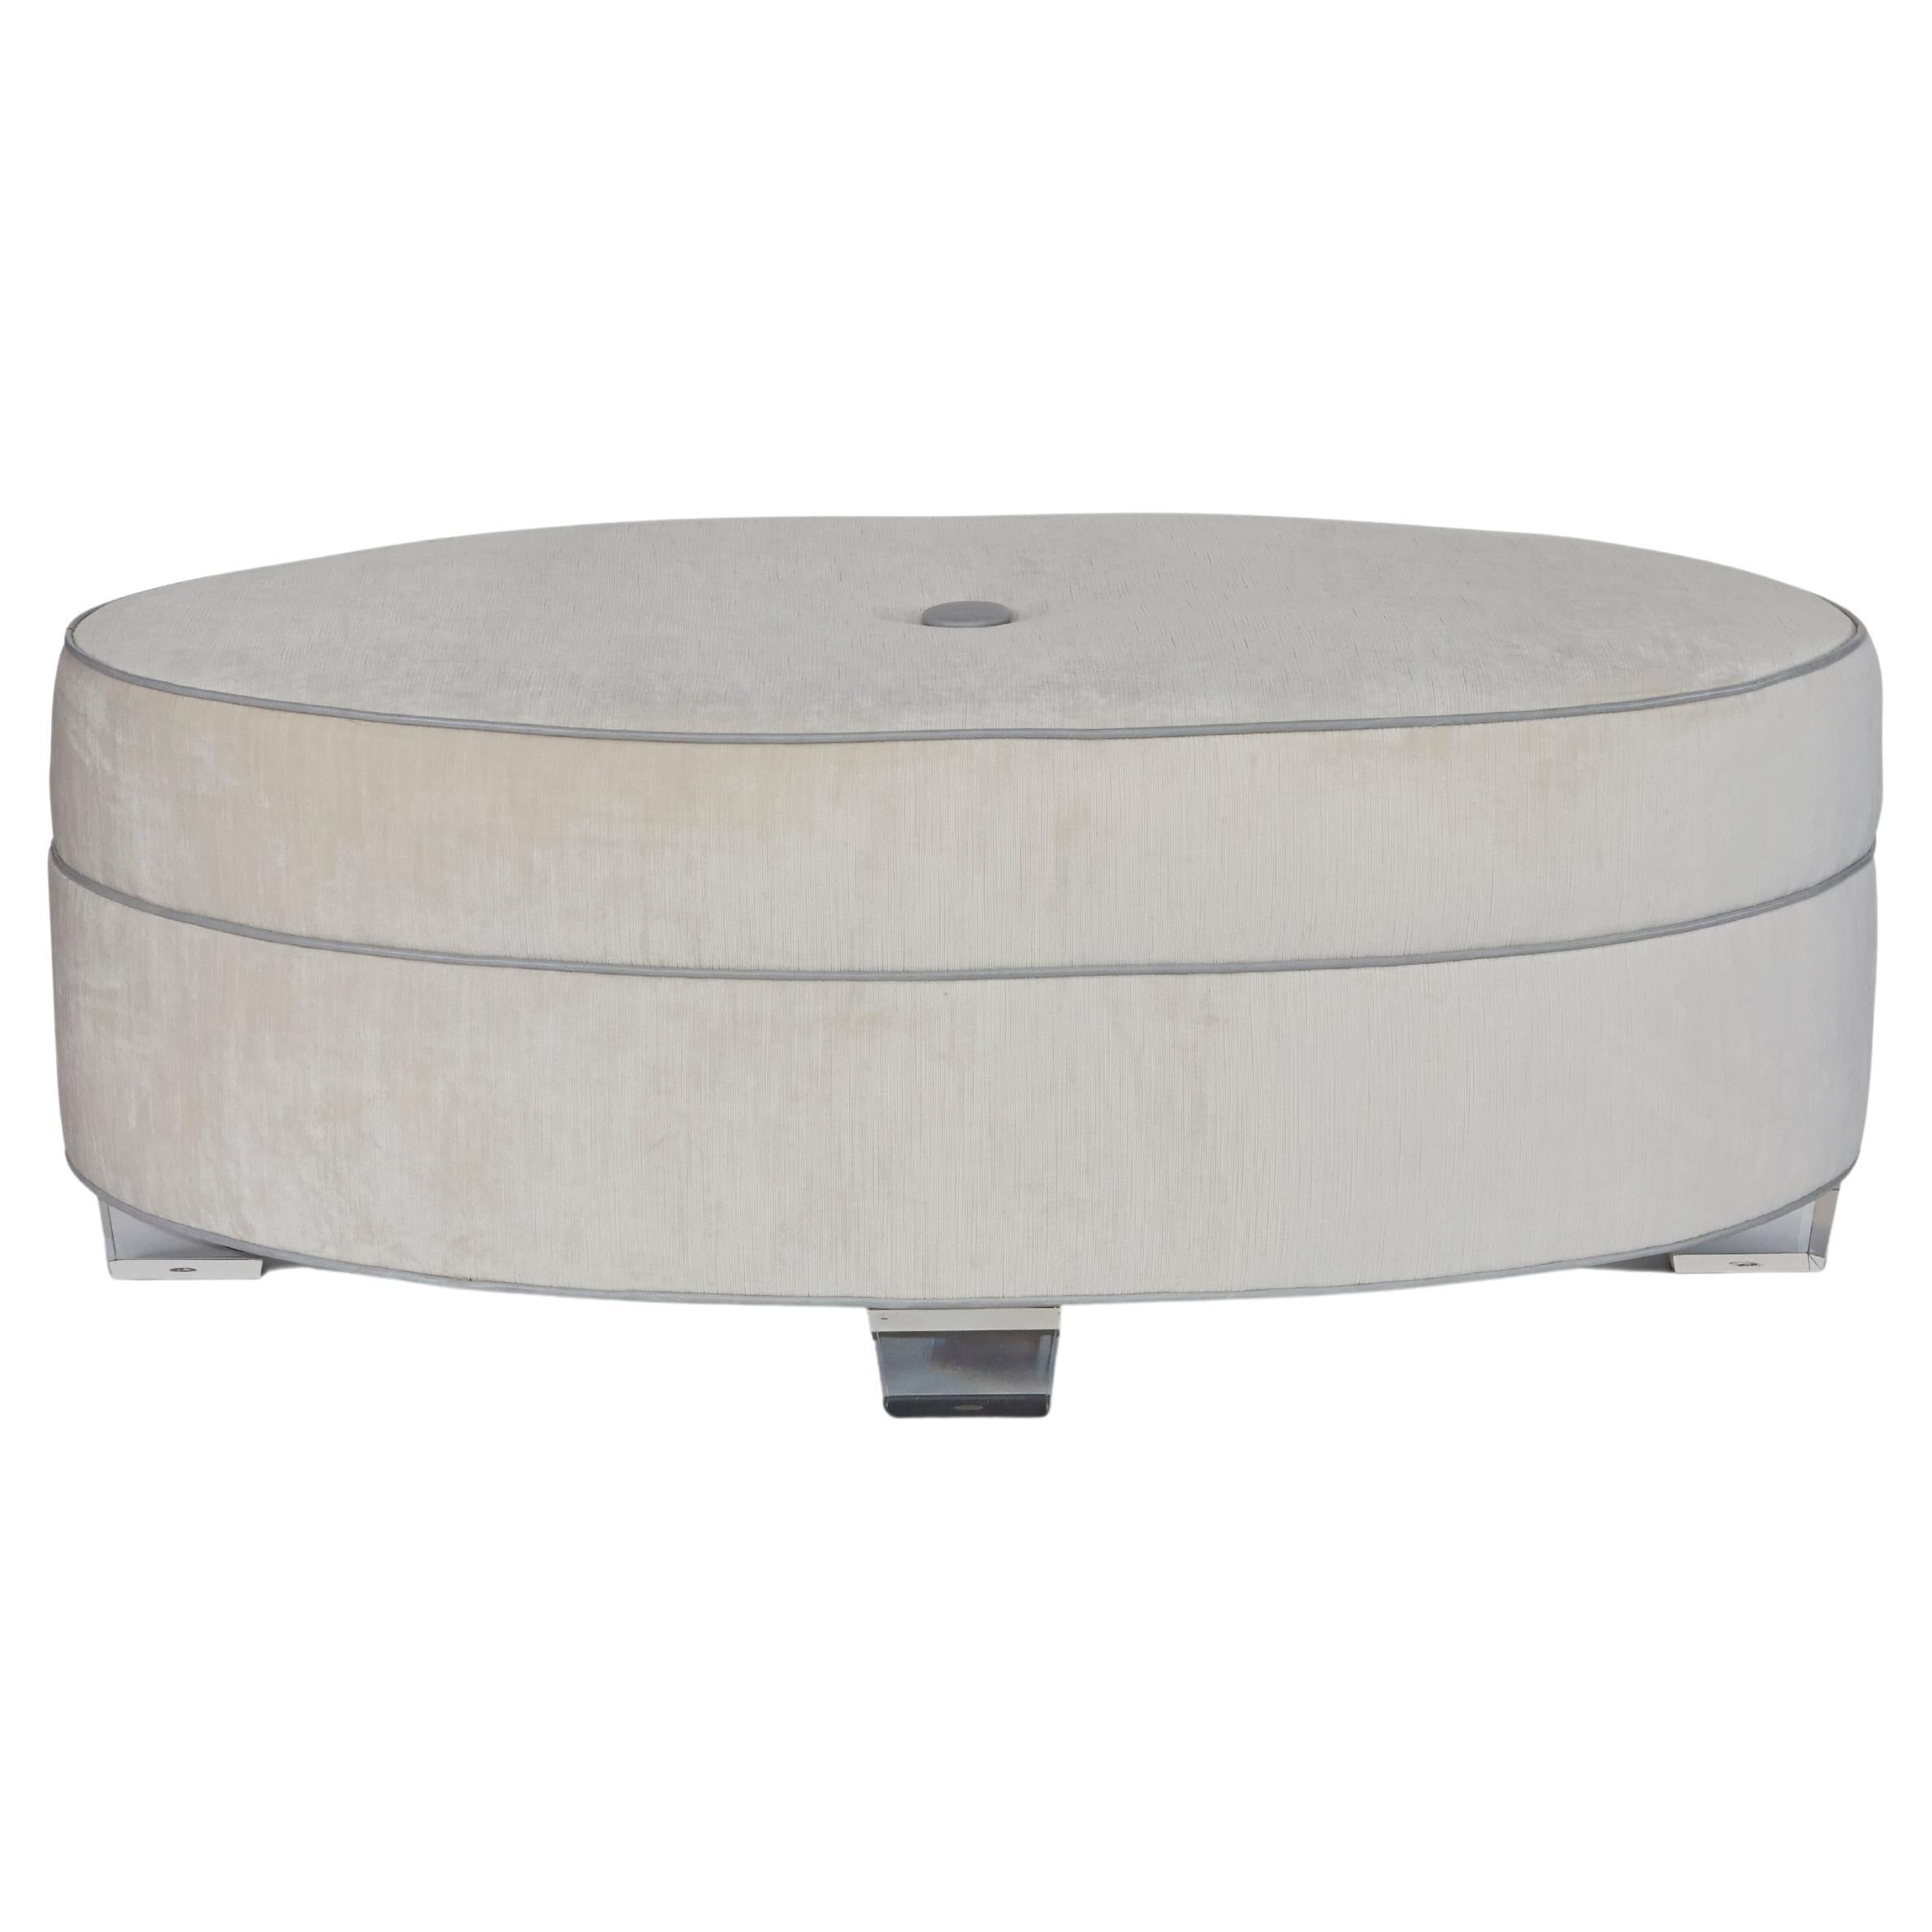 Make no mistake of underestimating our Gabriella Ottoman; she commands attention immediately upon taking up residence. Her classic oval shape, graced with tufted-top detail and distinguished leg finish engender a design allowing for a multitude of